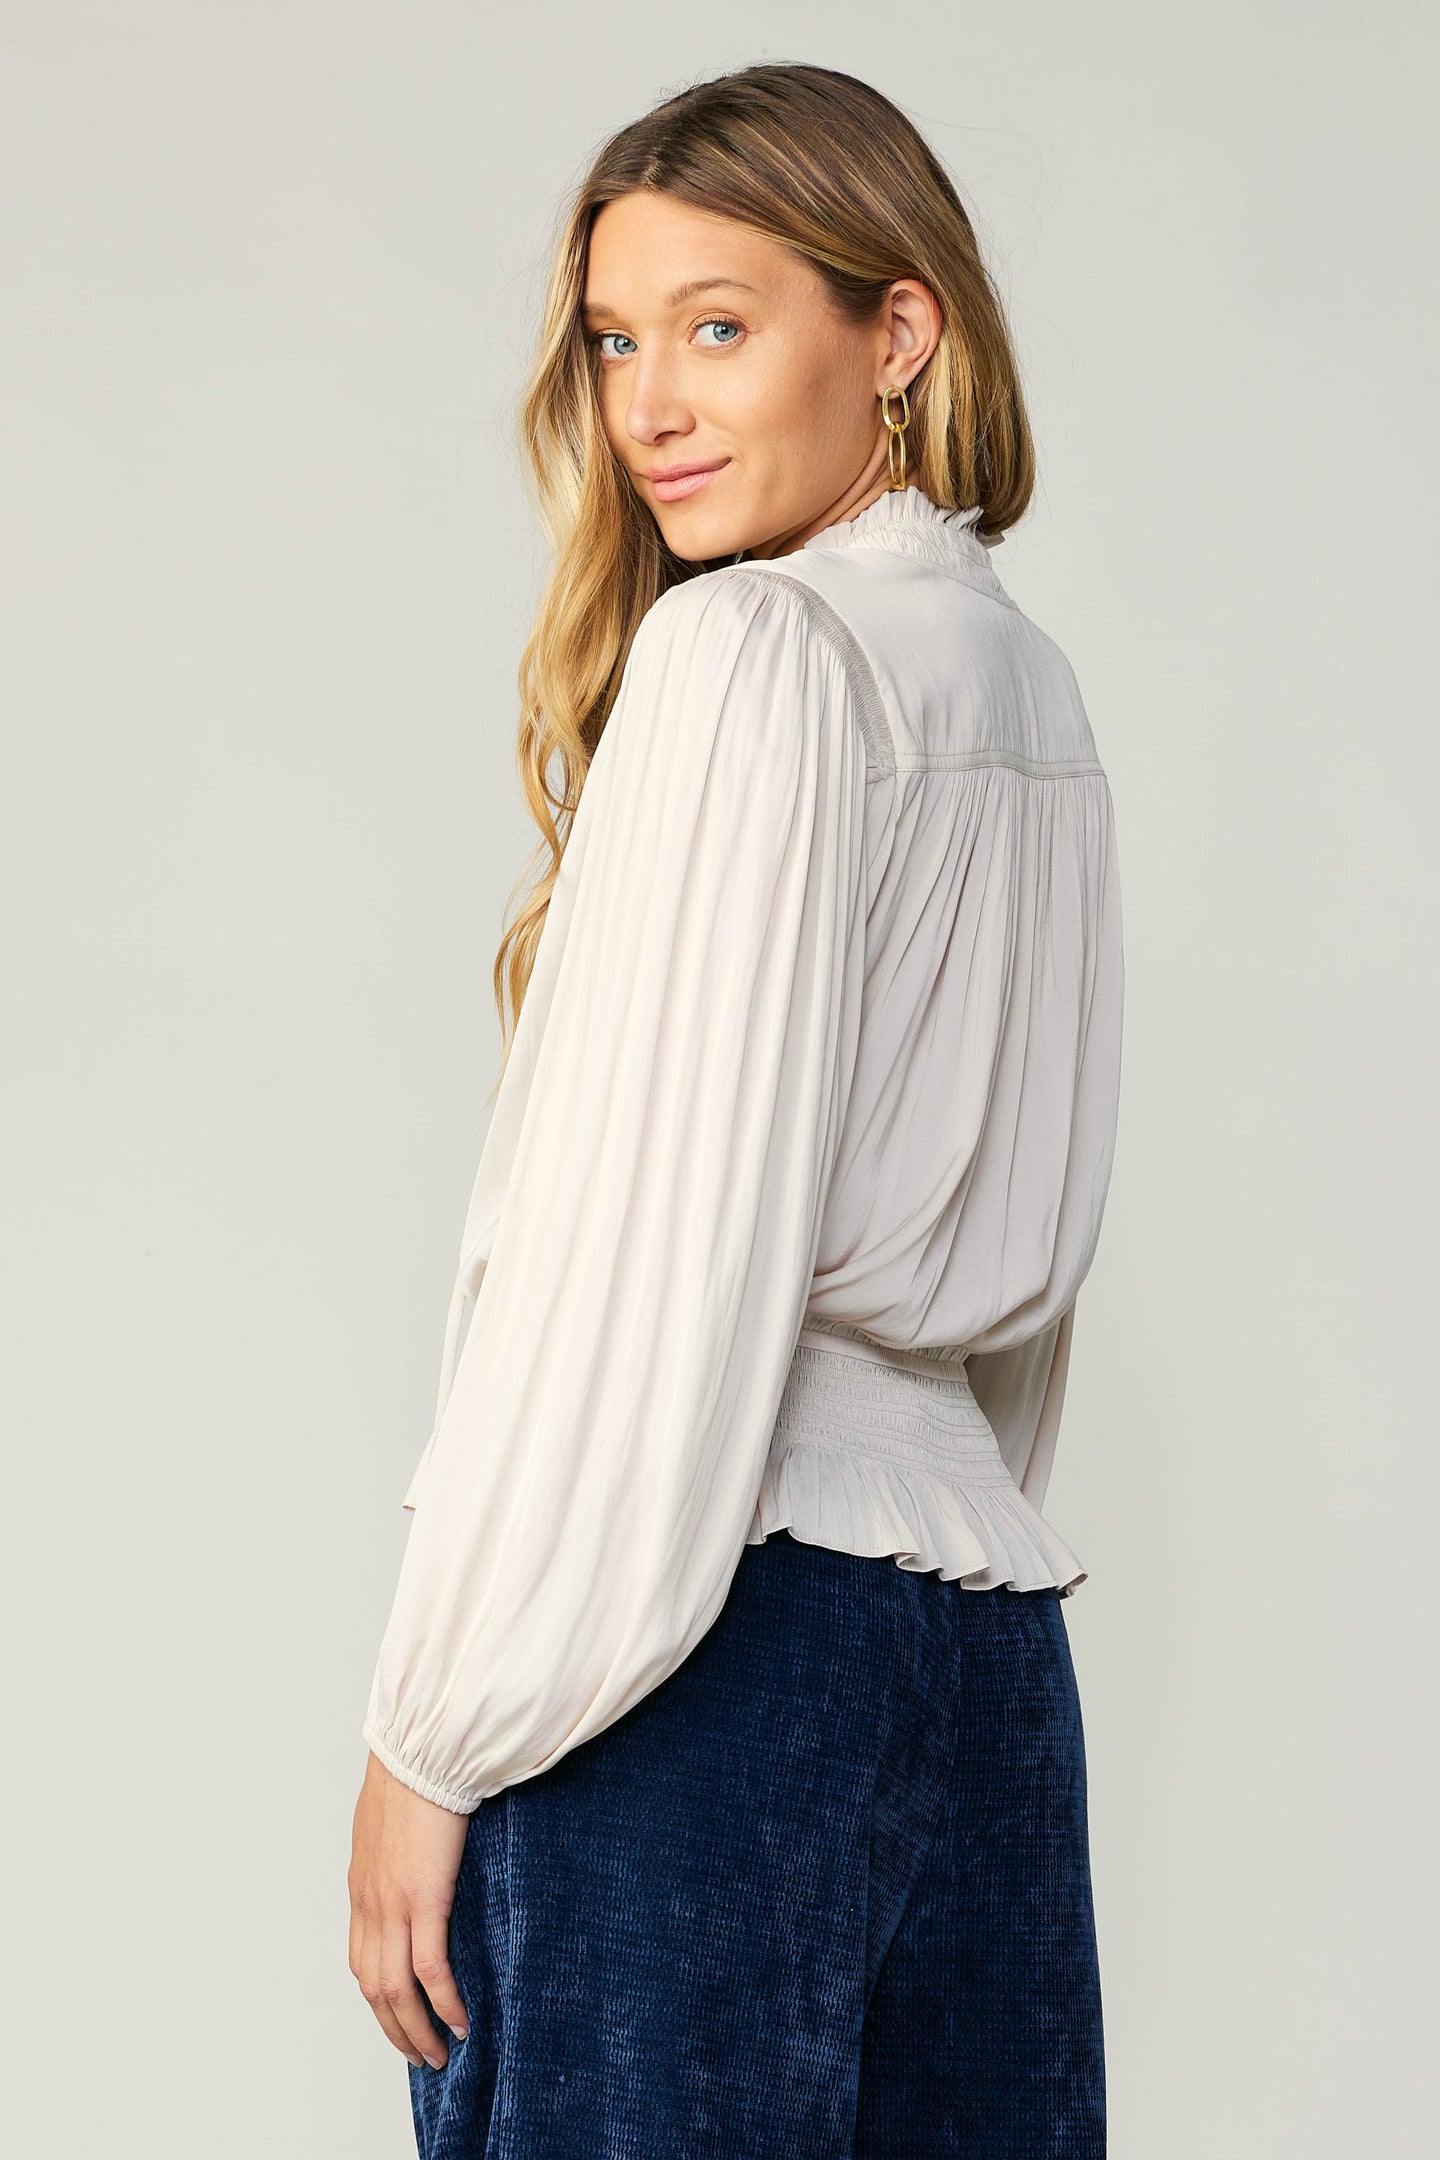 Peplum Collared Blouse – CURRENT AIR